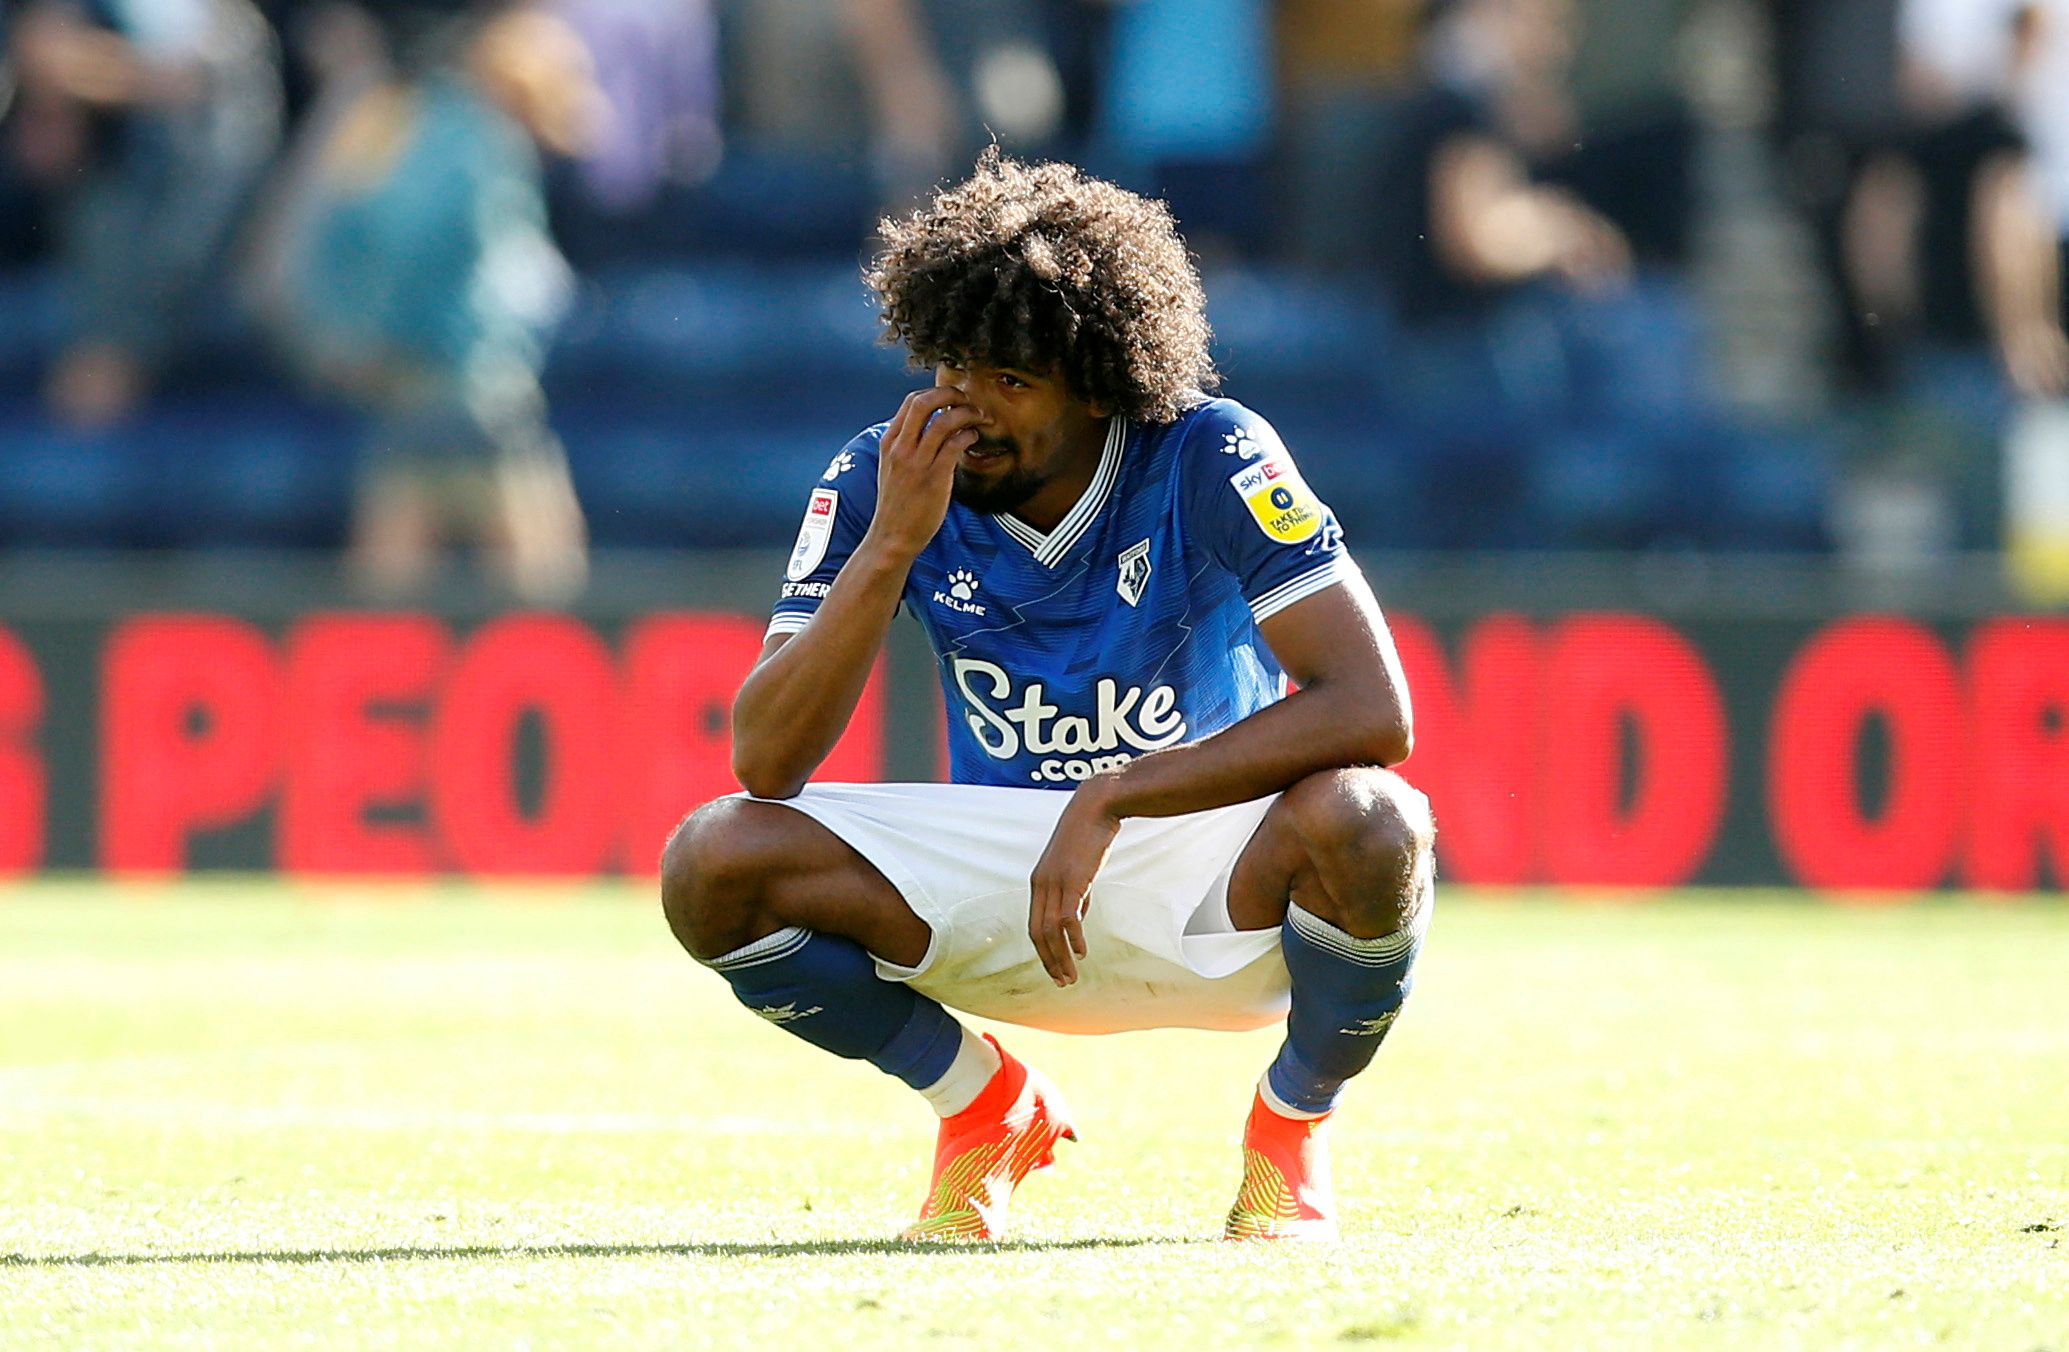 Soccer Football - Championship - Preston North End v Watford - Deepdale, Preston, Britain - August 20, 2022 Watford's Hamza Choudhury reacts after the match Action Images/Ed Sykes  EDITORIAL USE ONLY. No use with unauthorized audio, video, data, fixture lists, club/league logos or 